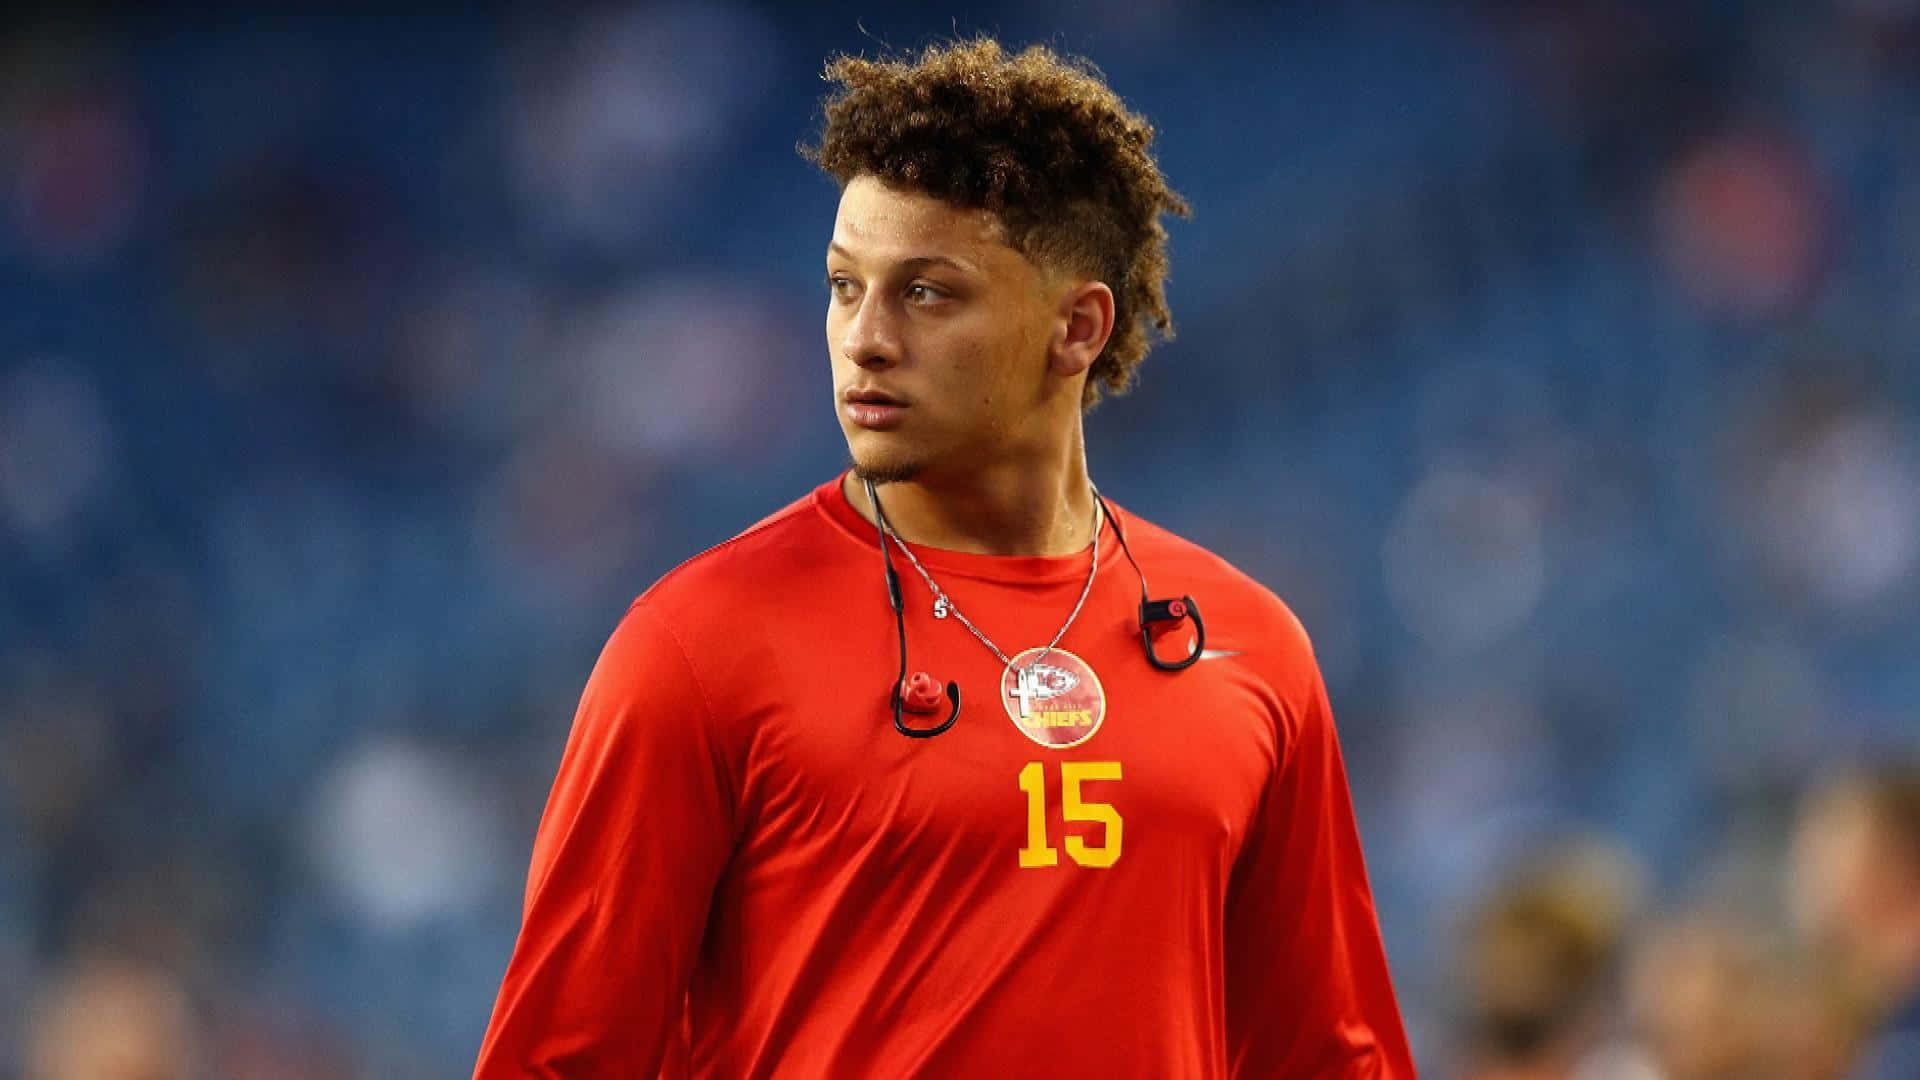 Cool And Collected, Patrick Mahomes